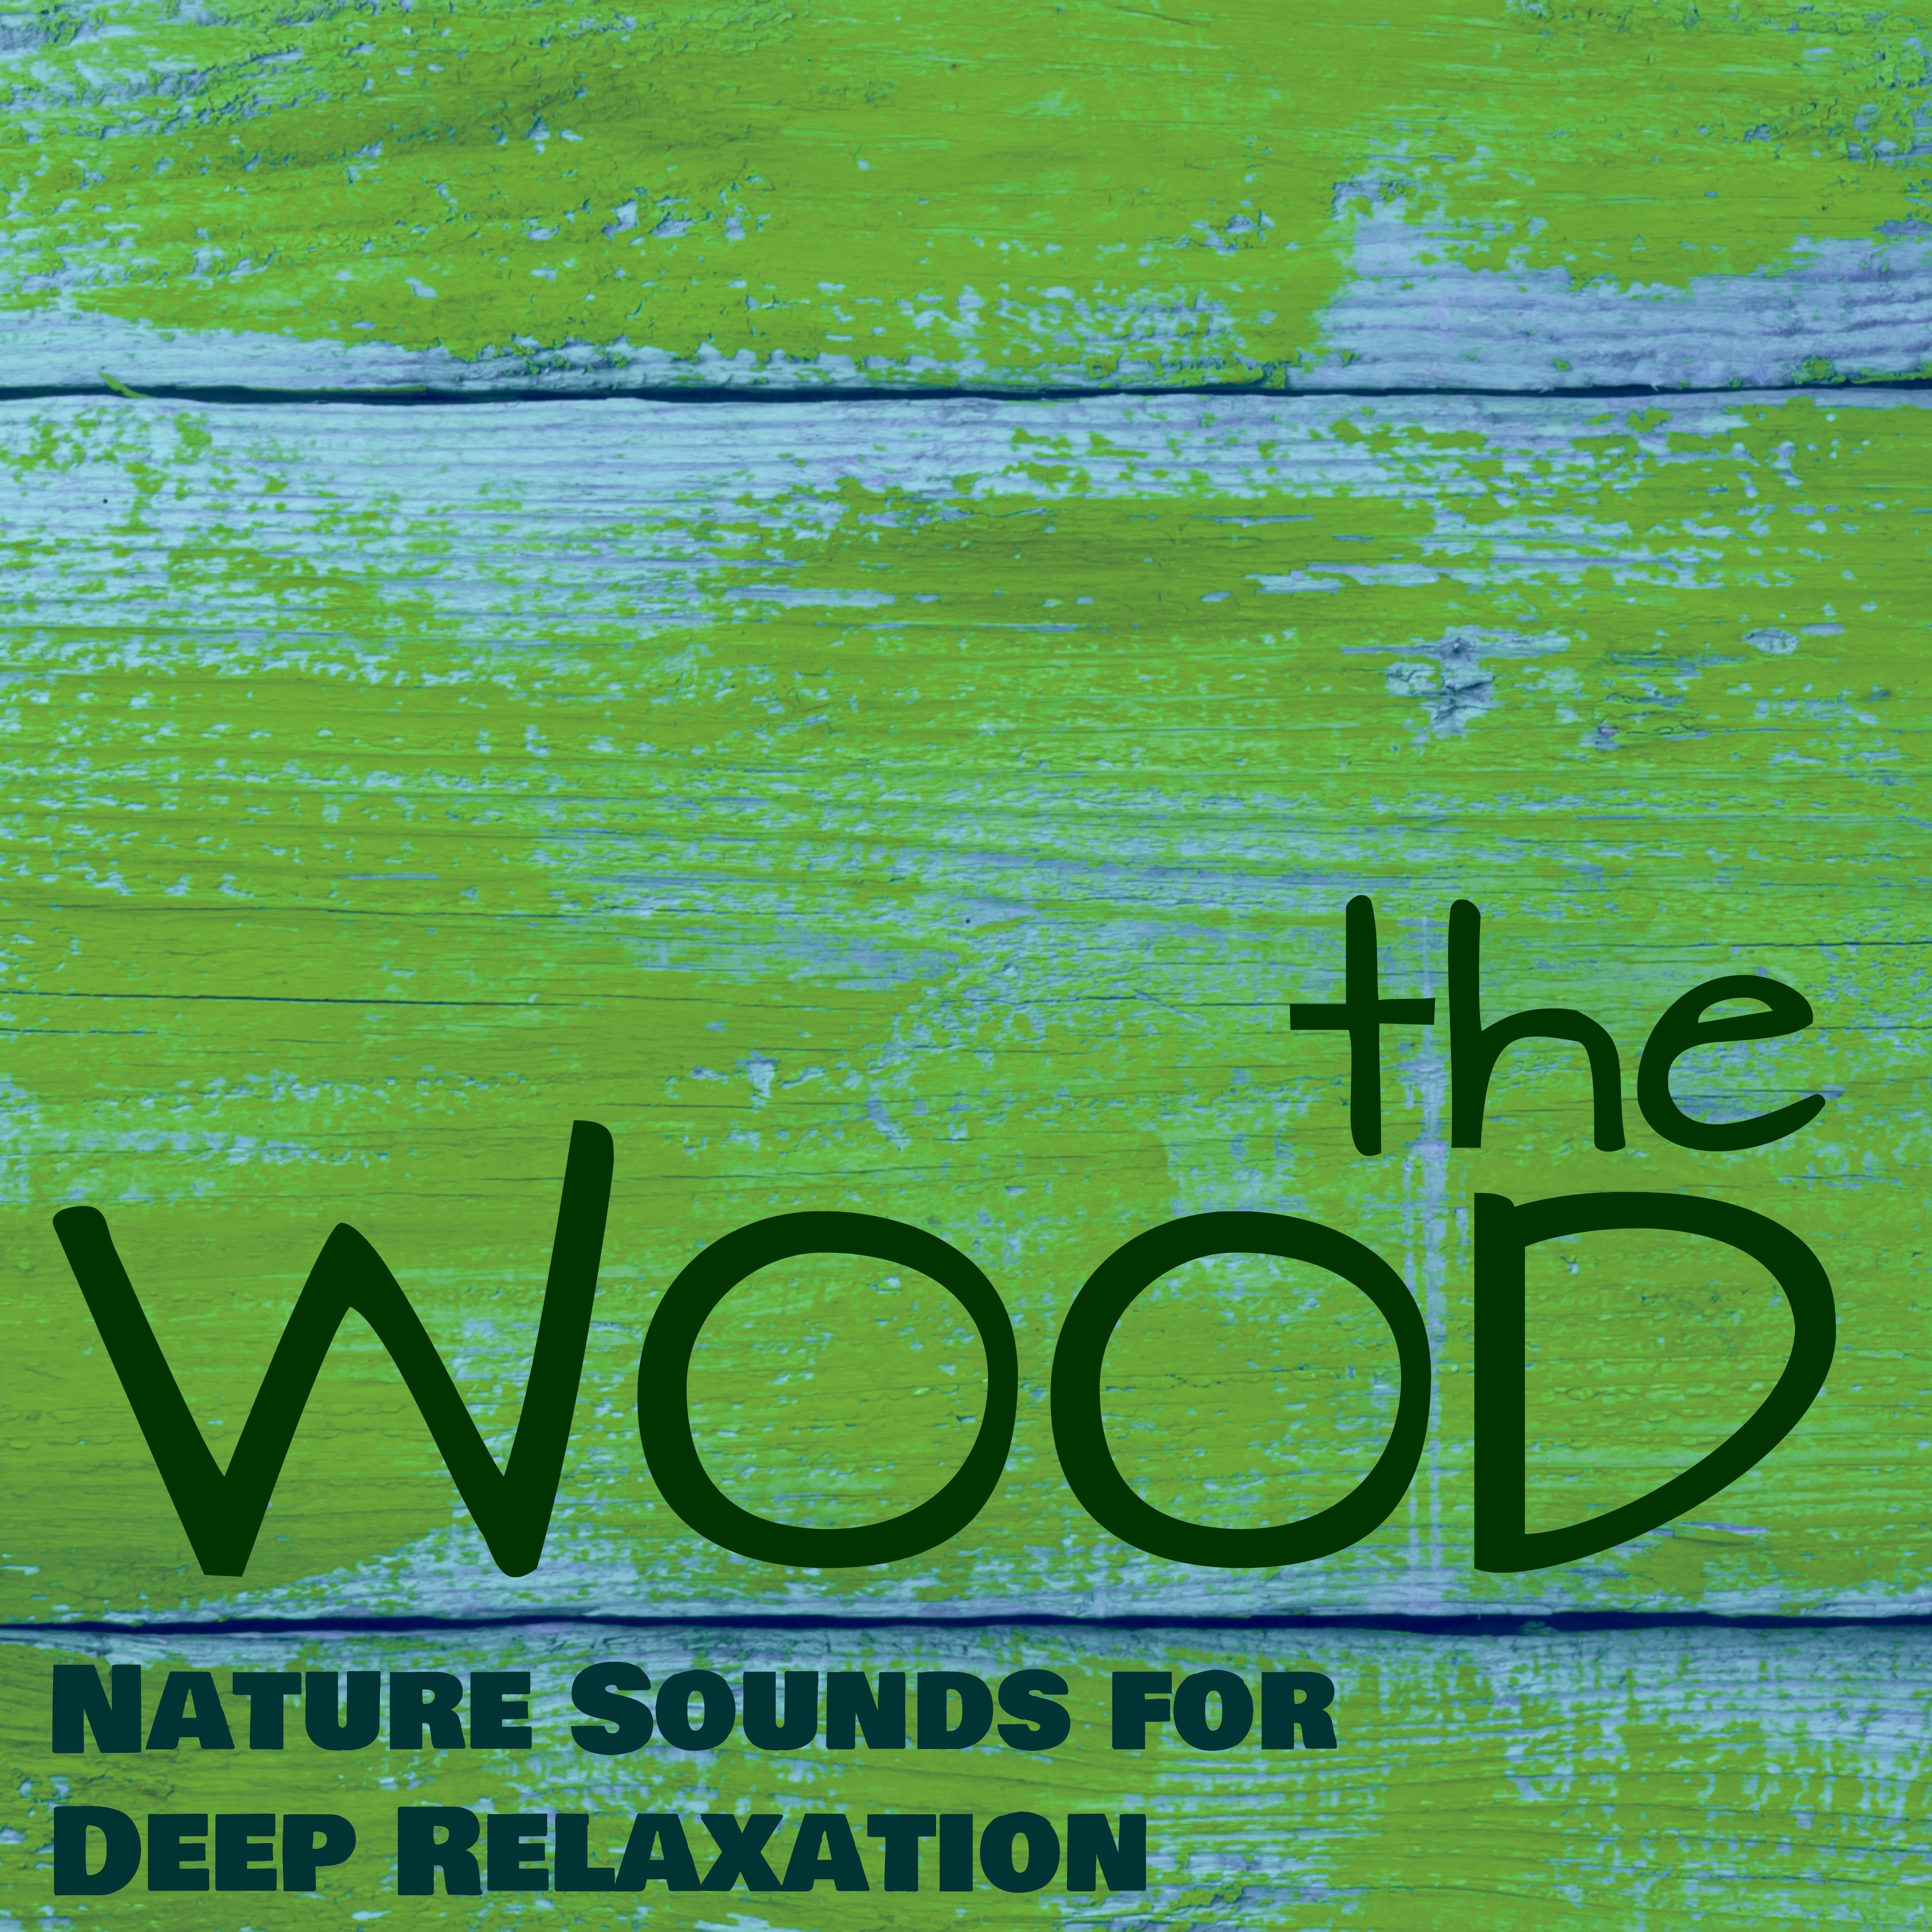 The Wood - Soothing Music Into the Nature Sounds for Deep Relaxation & Healing Meditation to Live Better and Happy